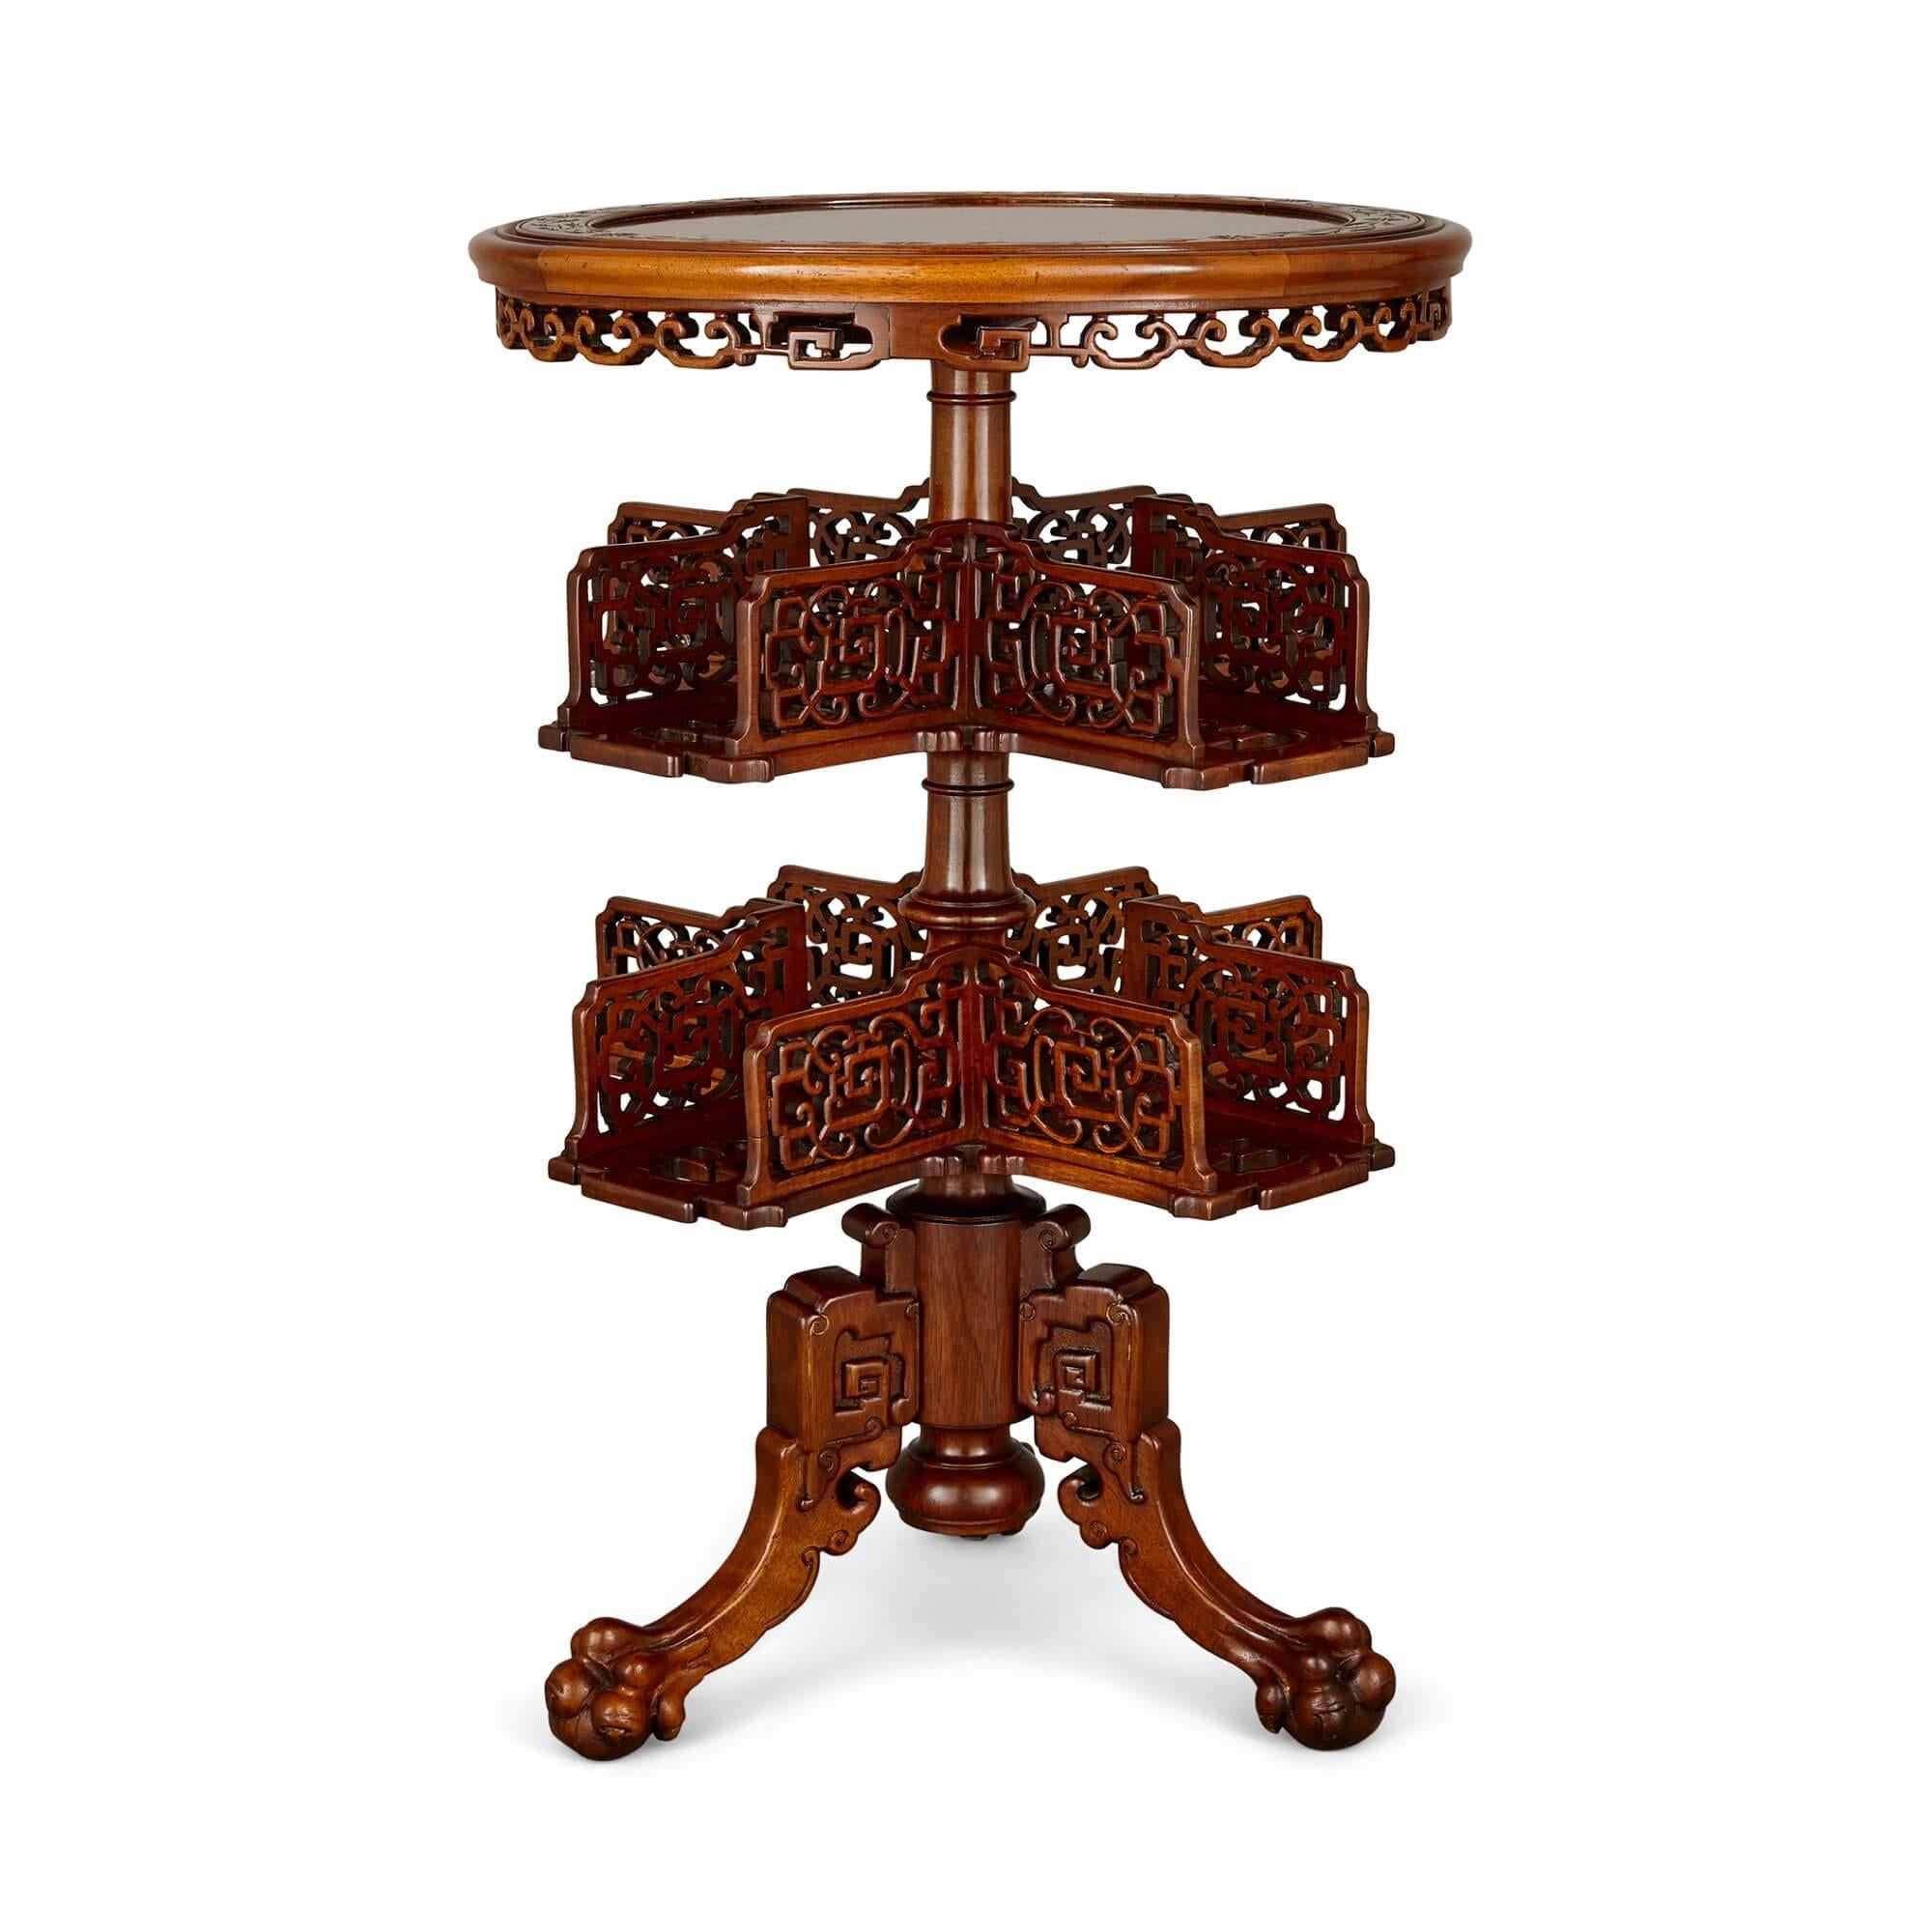 Two round inlaid hardwood Chinese tables
Chinese, Early 20th Century
Height 77cm, diameter 51cm

The main body of these superb Chinese tables has been crafted from hardwood, and their tabletops are mounted with marble and wood. An intricate,